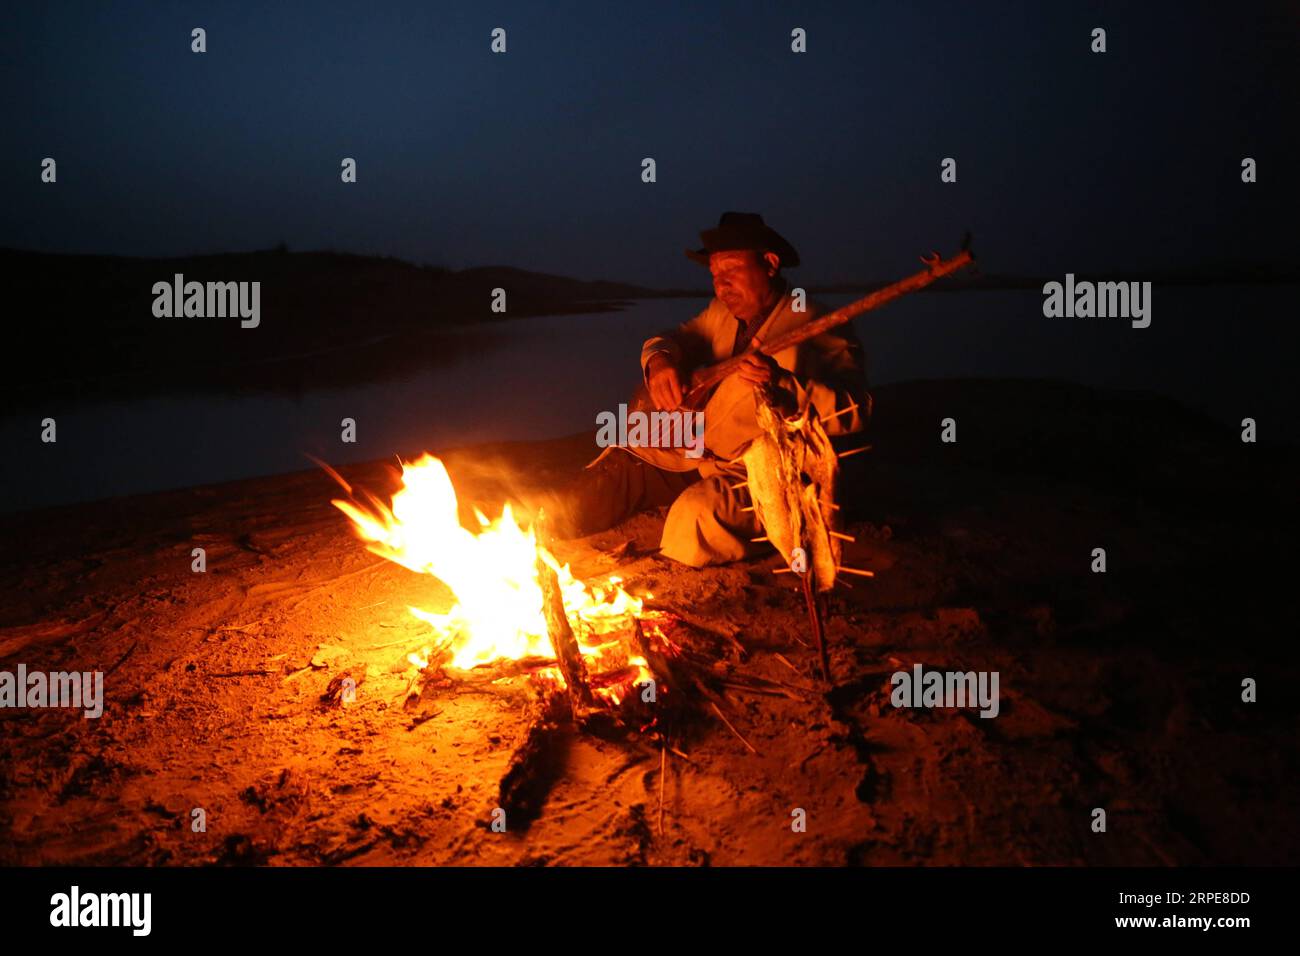 (190821) -- YULI, Aug. 21, 2019 -- Amudun Abudu plays an instrument in Lop Nur People Village in Yuli County, northwest China s Xinjiang Uygur Autonomous Region, April 11, 2019. Lop Nur People Village is located in Yuli County, where Tarim River flows through the deserts with populus euphratica forests reflection on the shimmering waves. Amudun Abudu, a 61-year old typical Lop Nur villager, works in local tourism industry. With the changes of the times, many Lop Nur people have various options for a living, yet he insists on the tradition of fishing in rivers and lakes. Not only does he make d Stock Photo